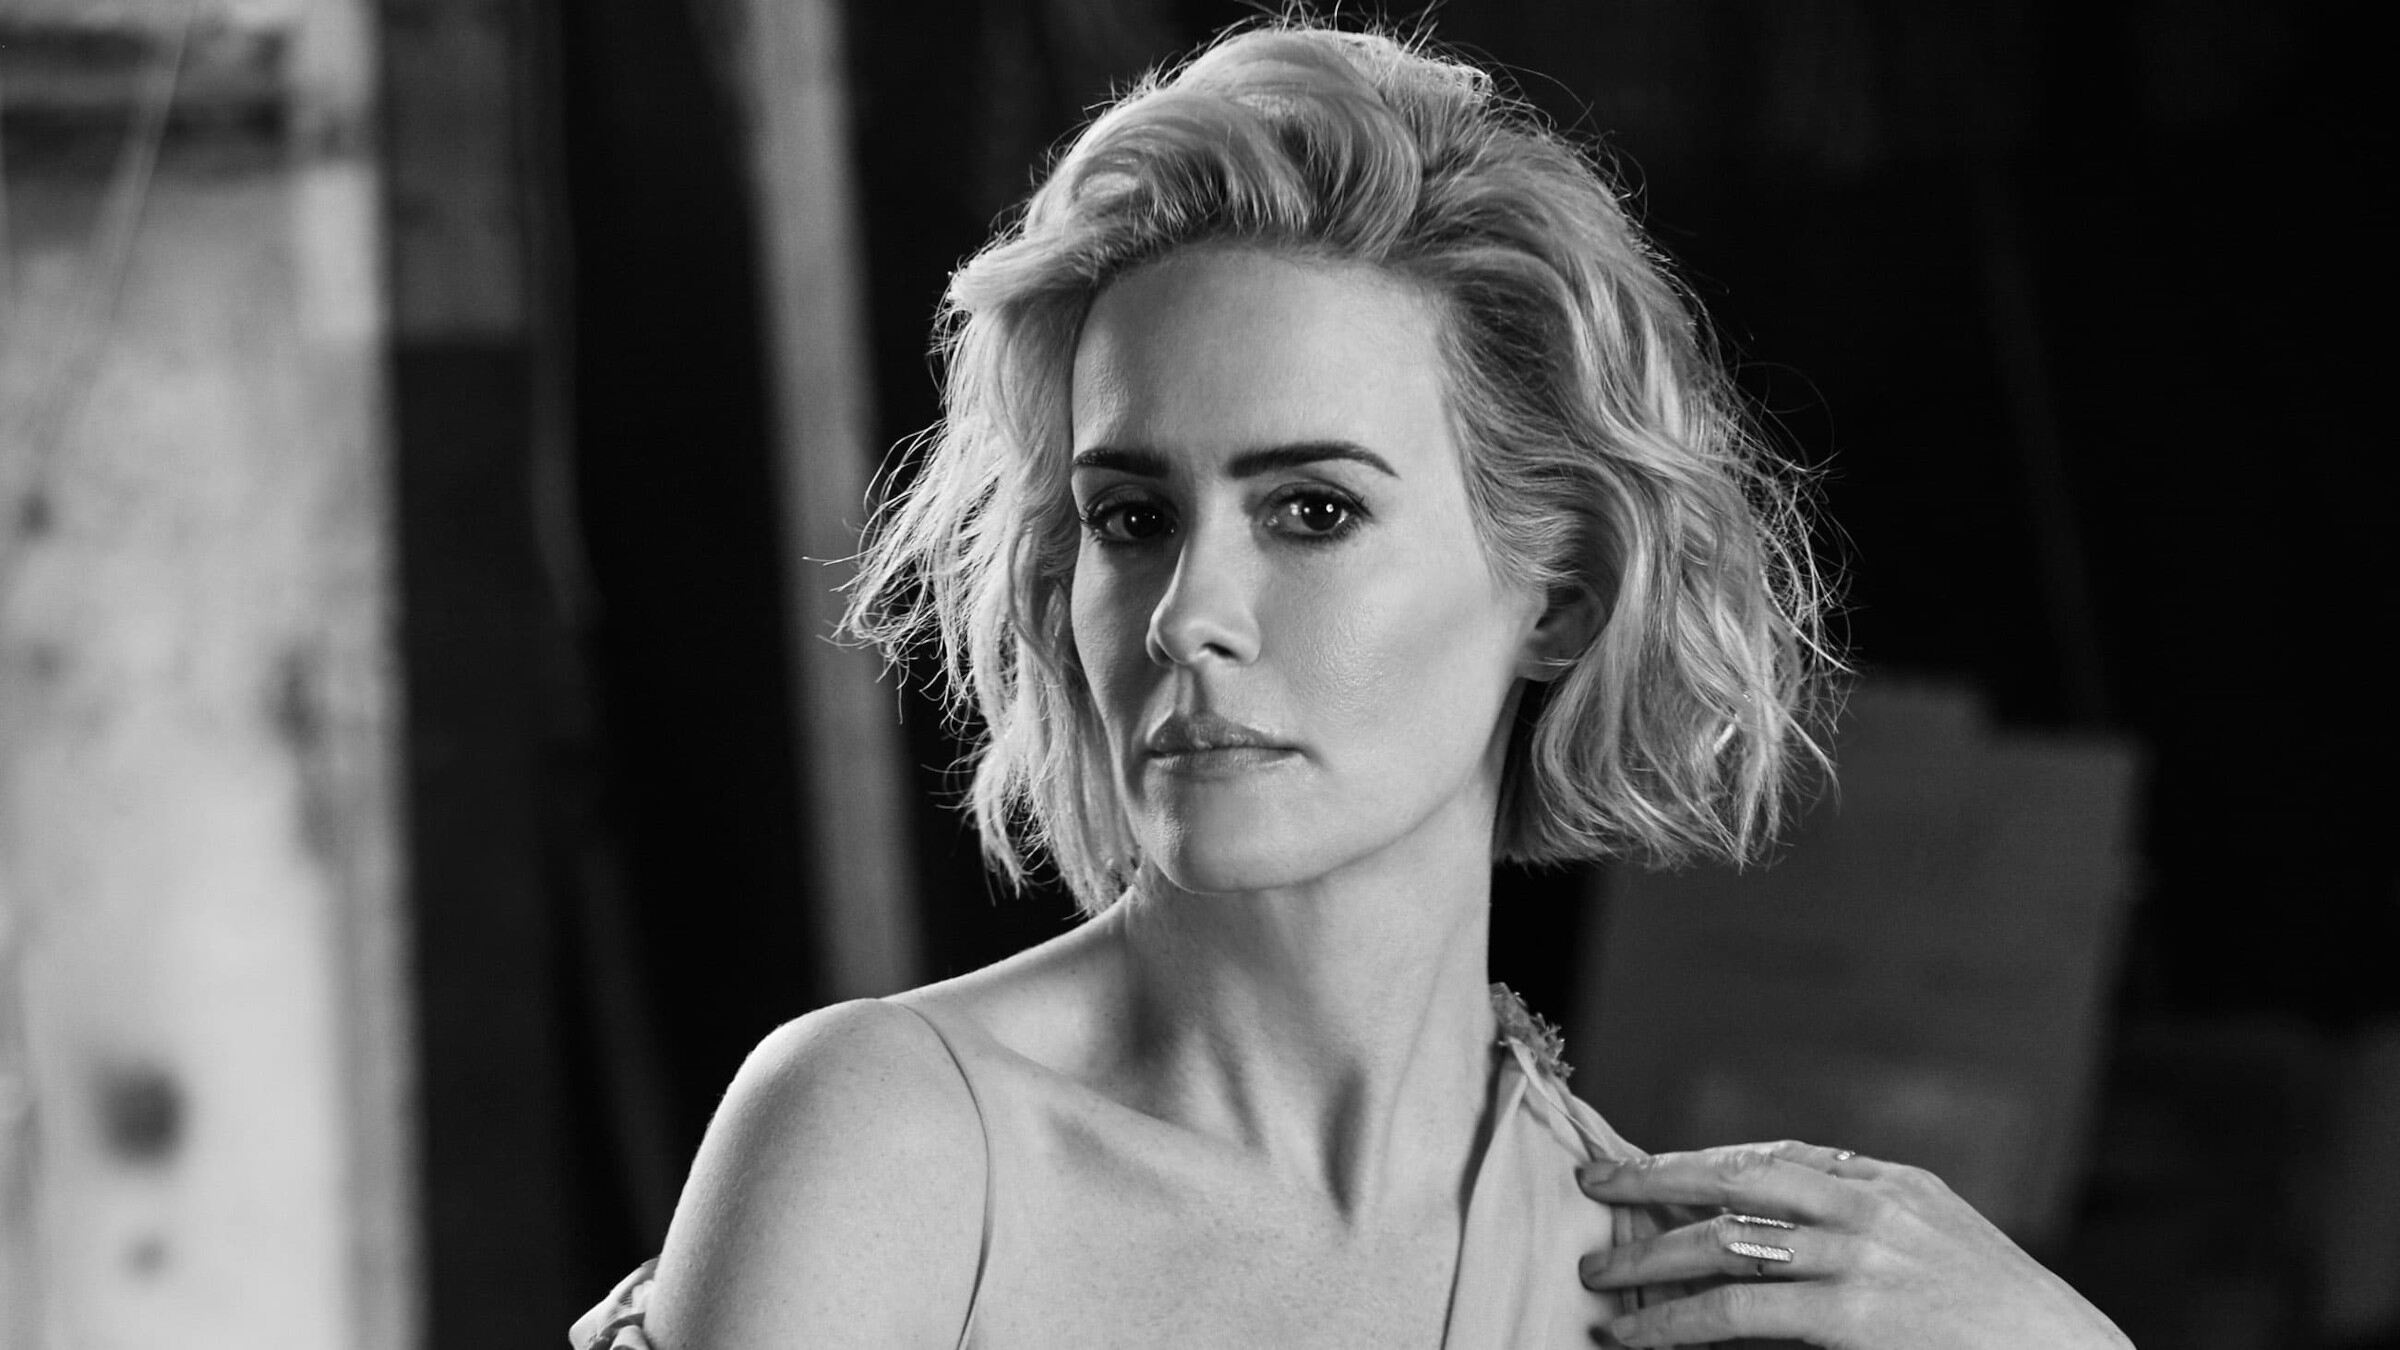 Don't steal her peach: Watch these legendary movies with Sarah Paulson ...